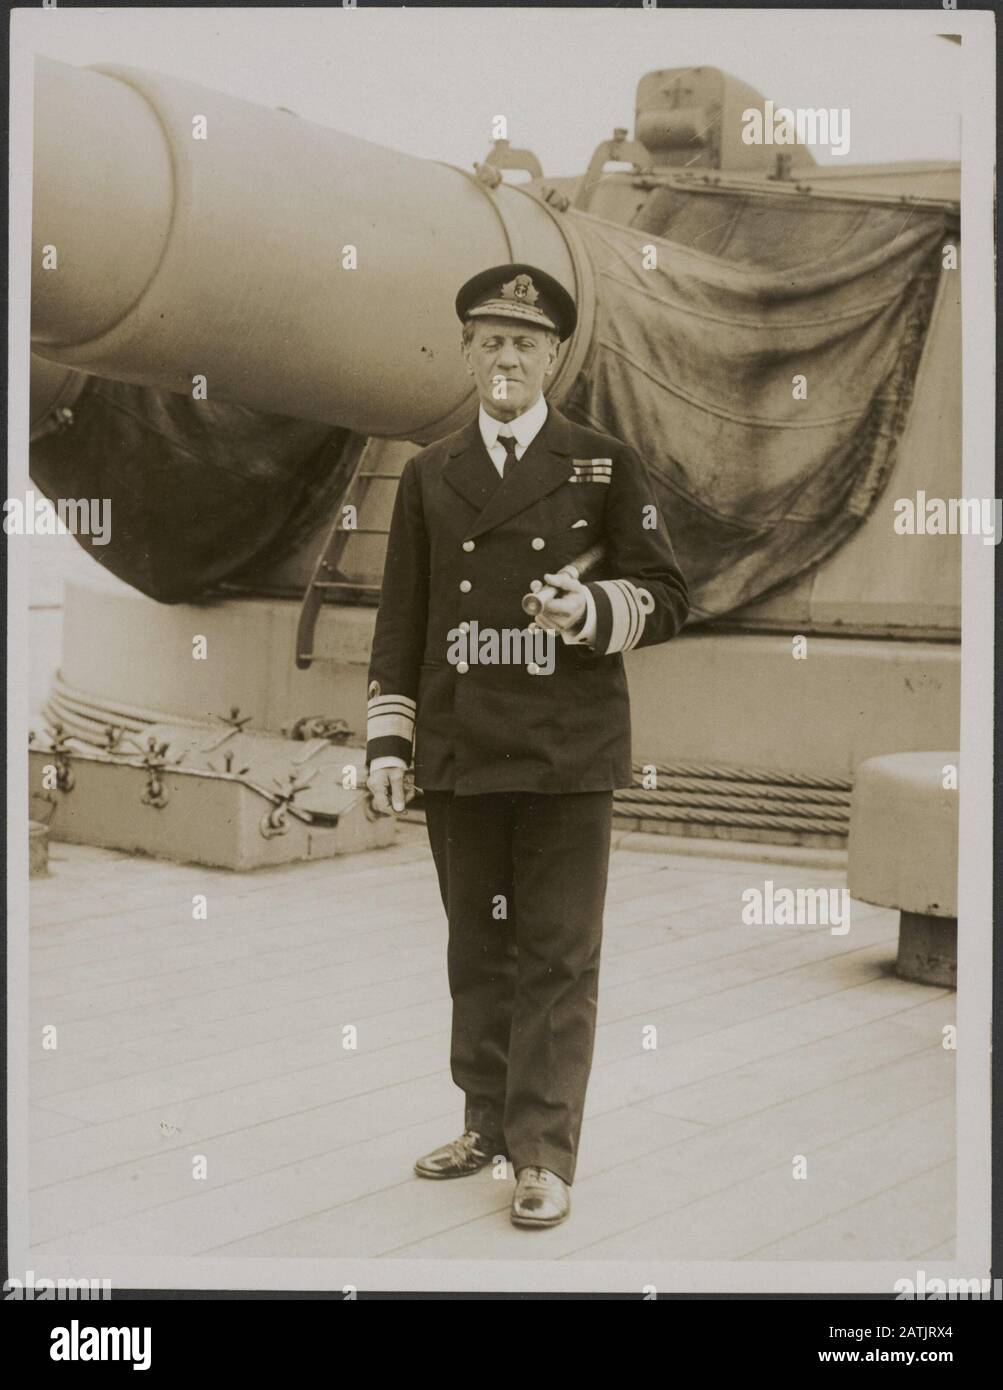 Journalists visit the Grand Fleet Description: Admiral Sir Cecil Burney Annotation: Journalists visit the Fleet. Admiral Sir Cecil Burney posing on a warship Date: {1914-1918} Keywords: WWI, military leaders, fleets Person Name: Burney, Cecil Stock Photo